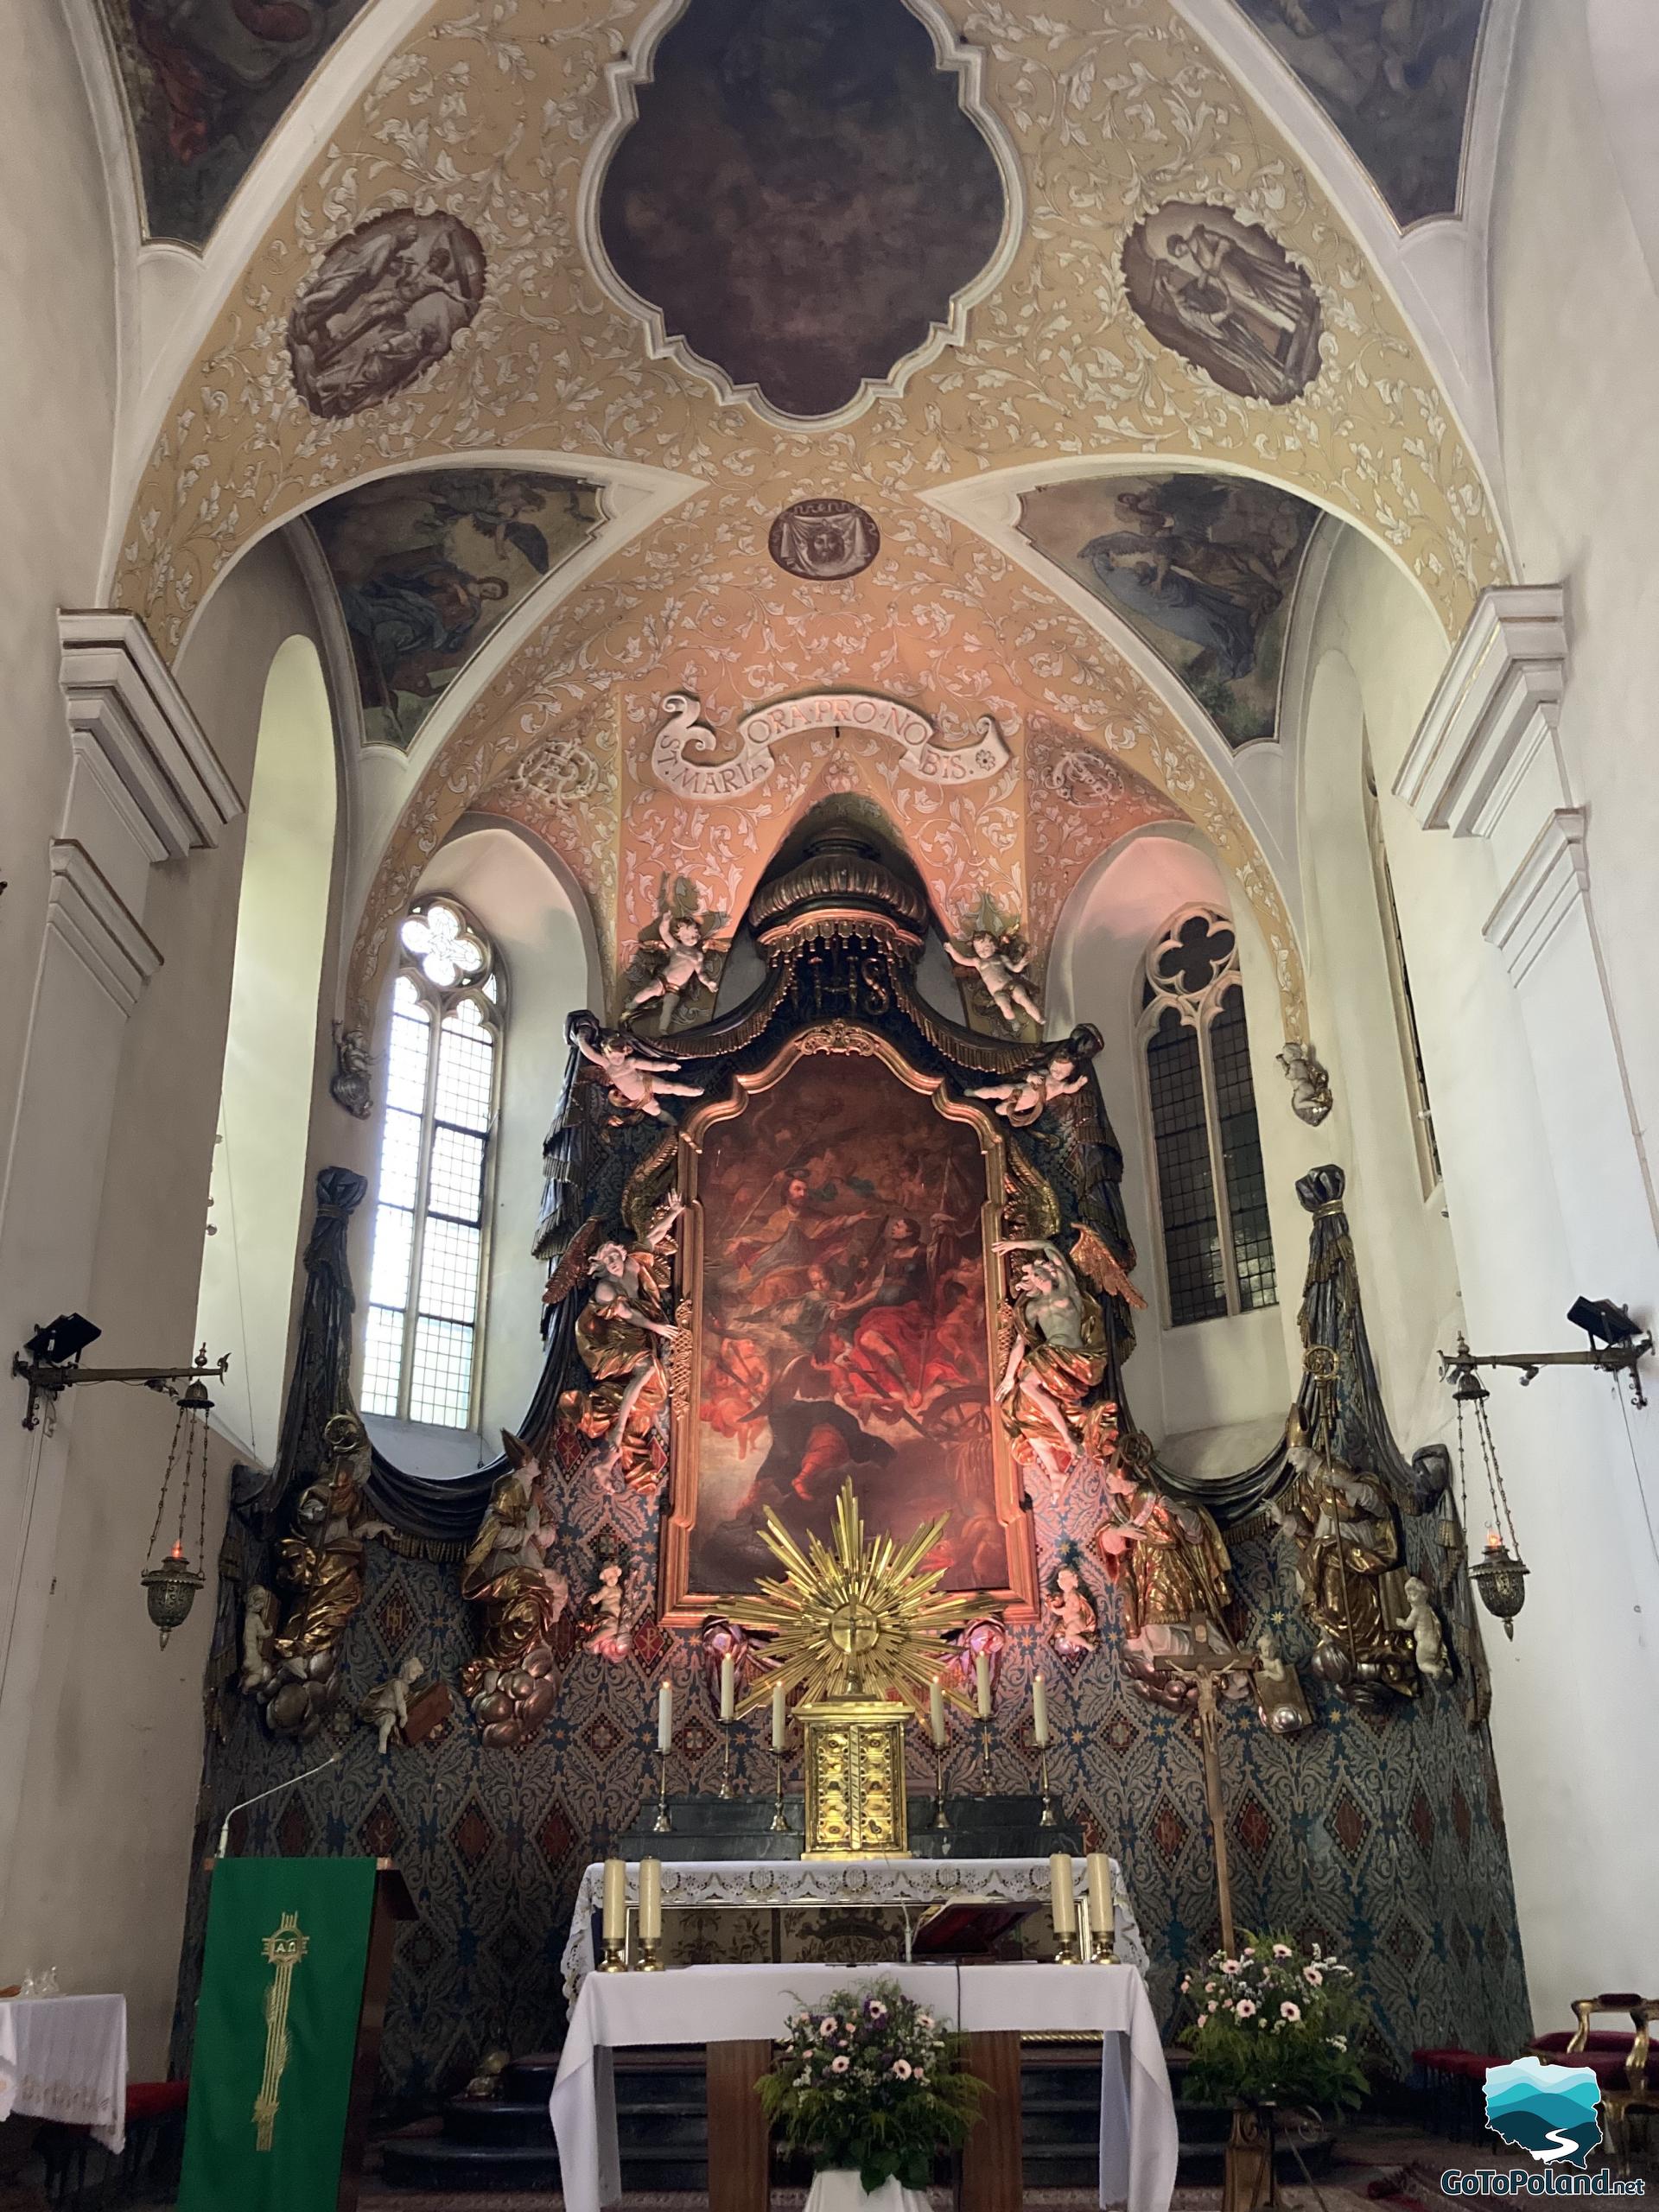 the main altar in the church lit in red